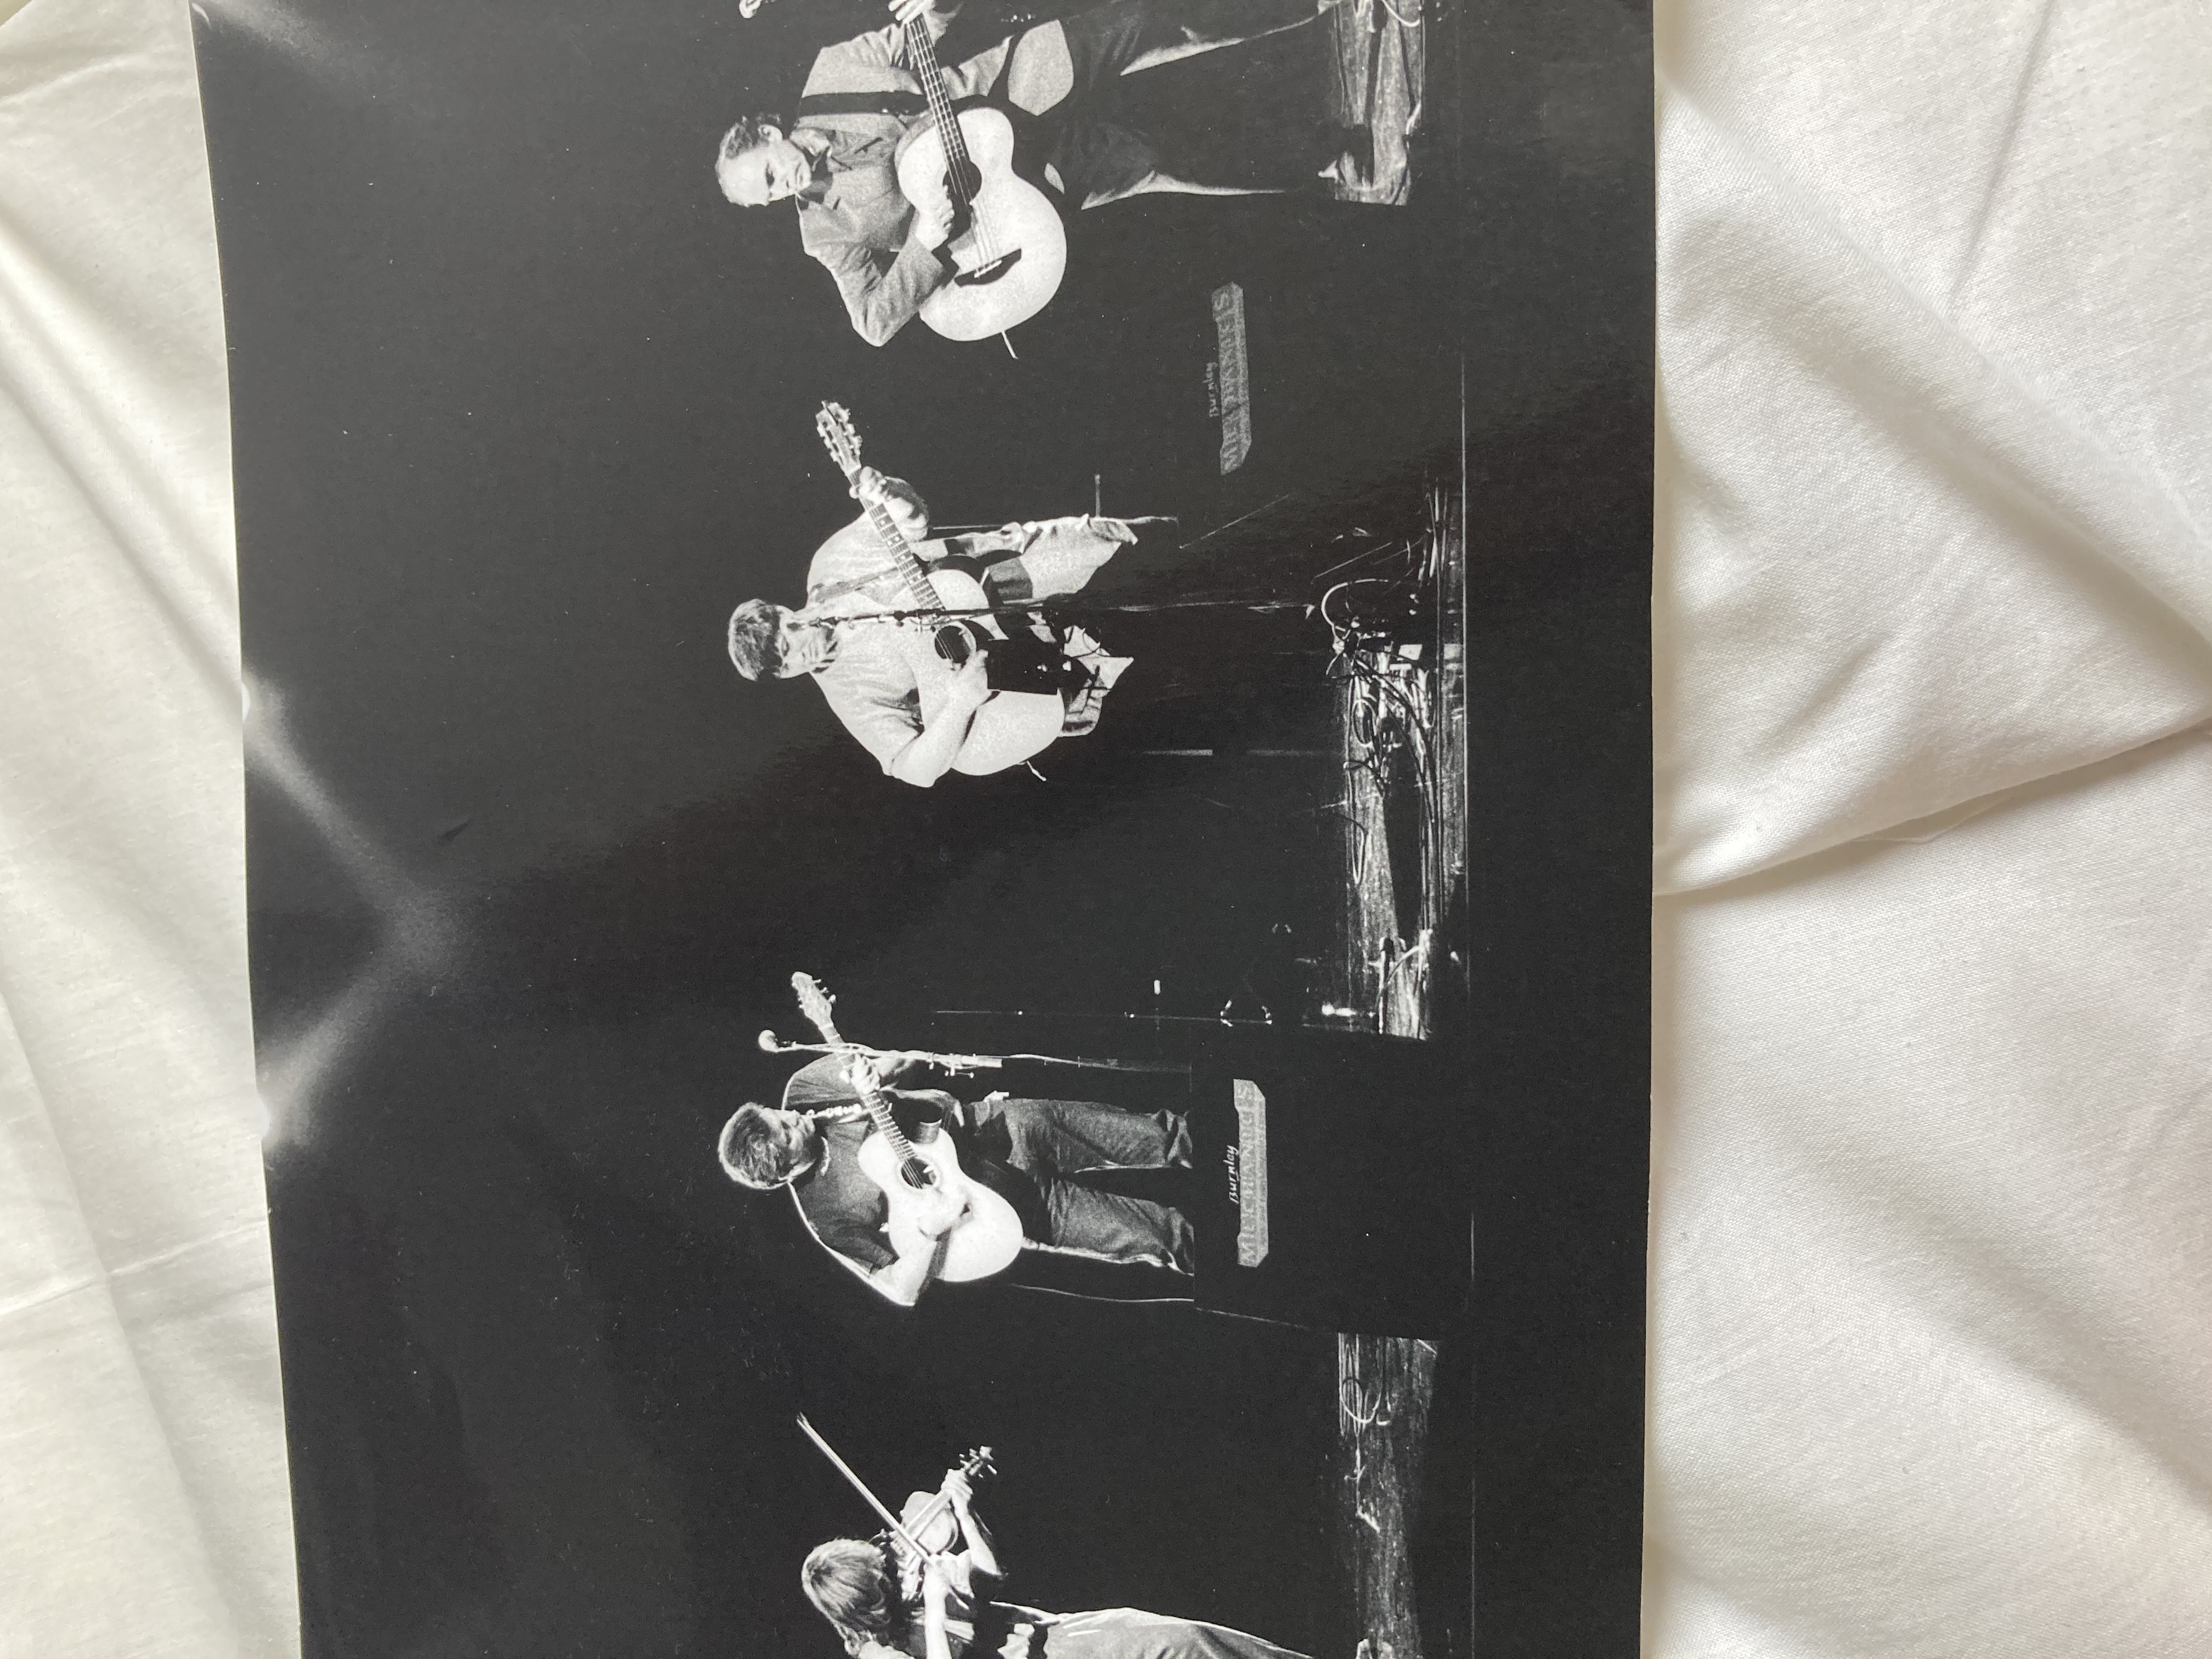 Albion first acoustic band, 1992